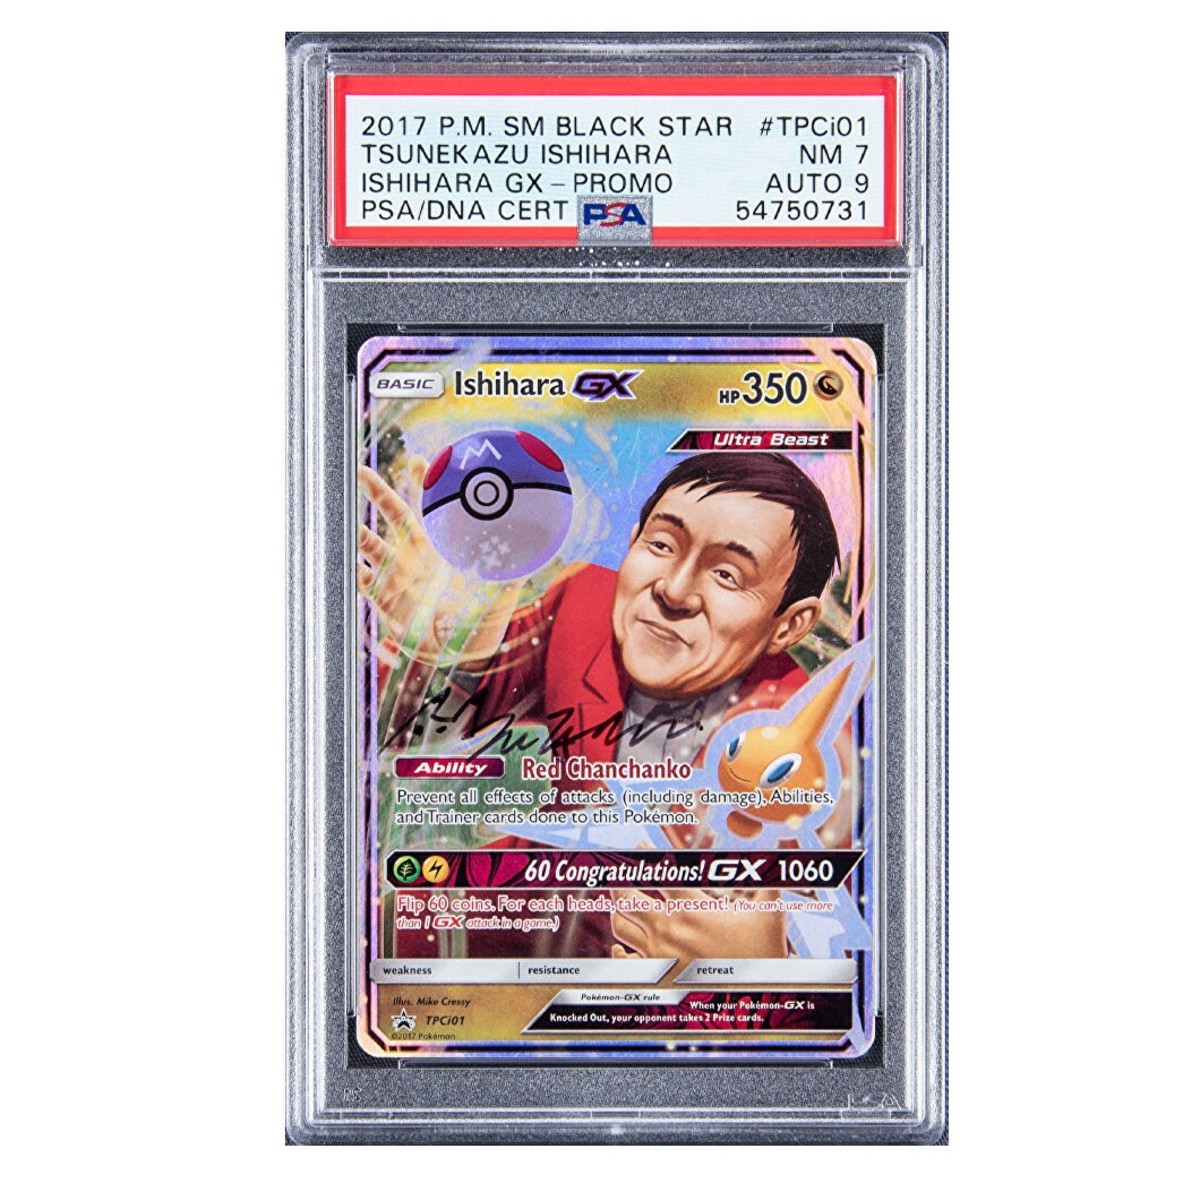 The 20 most expensive and rare Pokemon cards - Video Games on